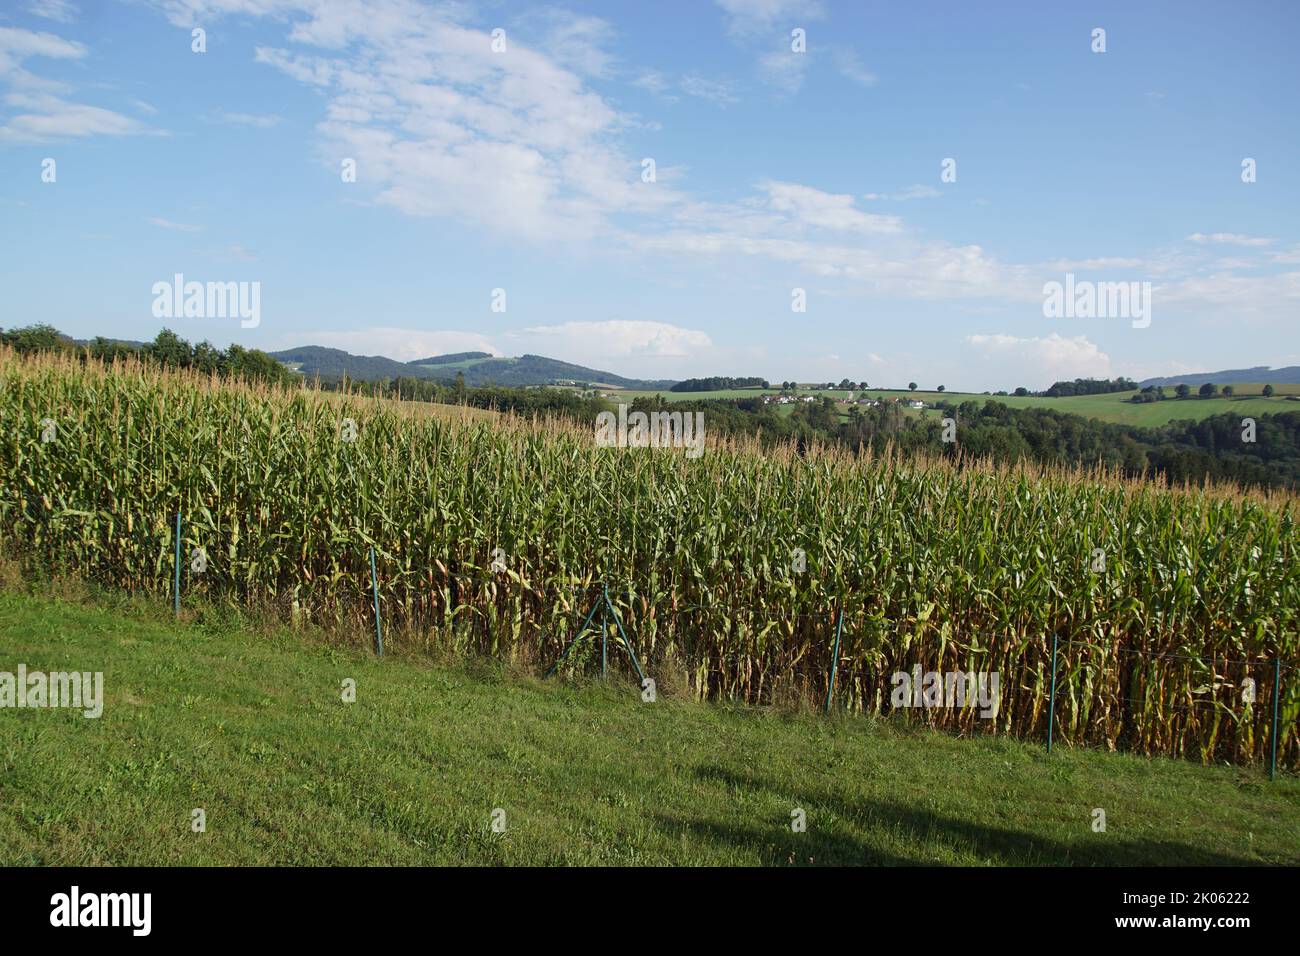 View of a green corn maize field with hills, forests and meadows in the background in the summer in southern Germany. Stock Photo